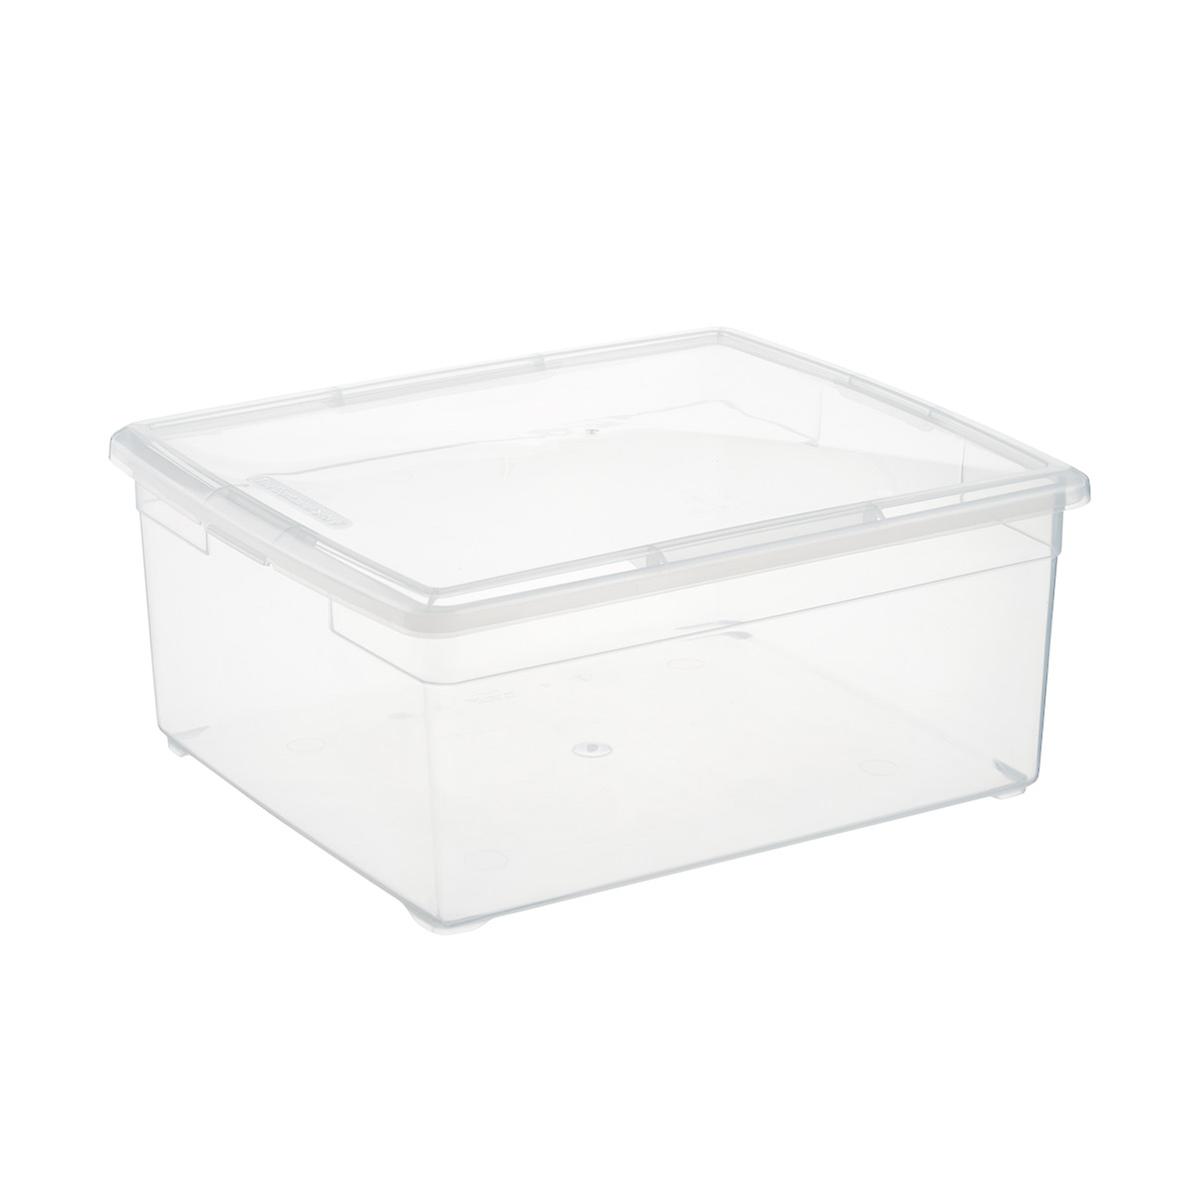 Clear Plastic Storage Boxes - Our Clear Storage Boxes | The Container Store